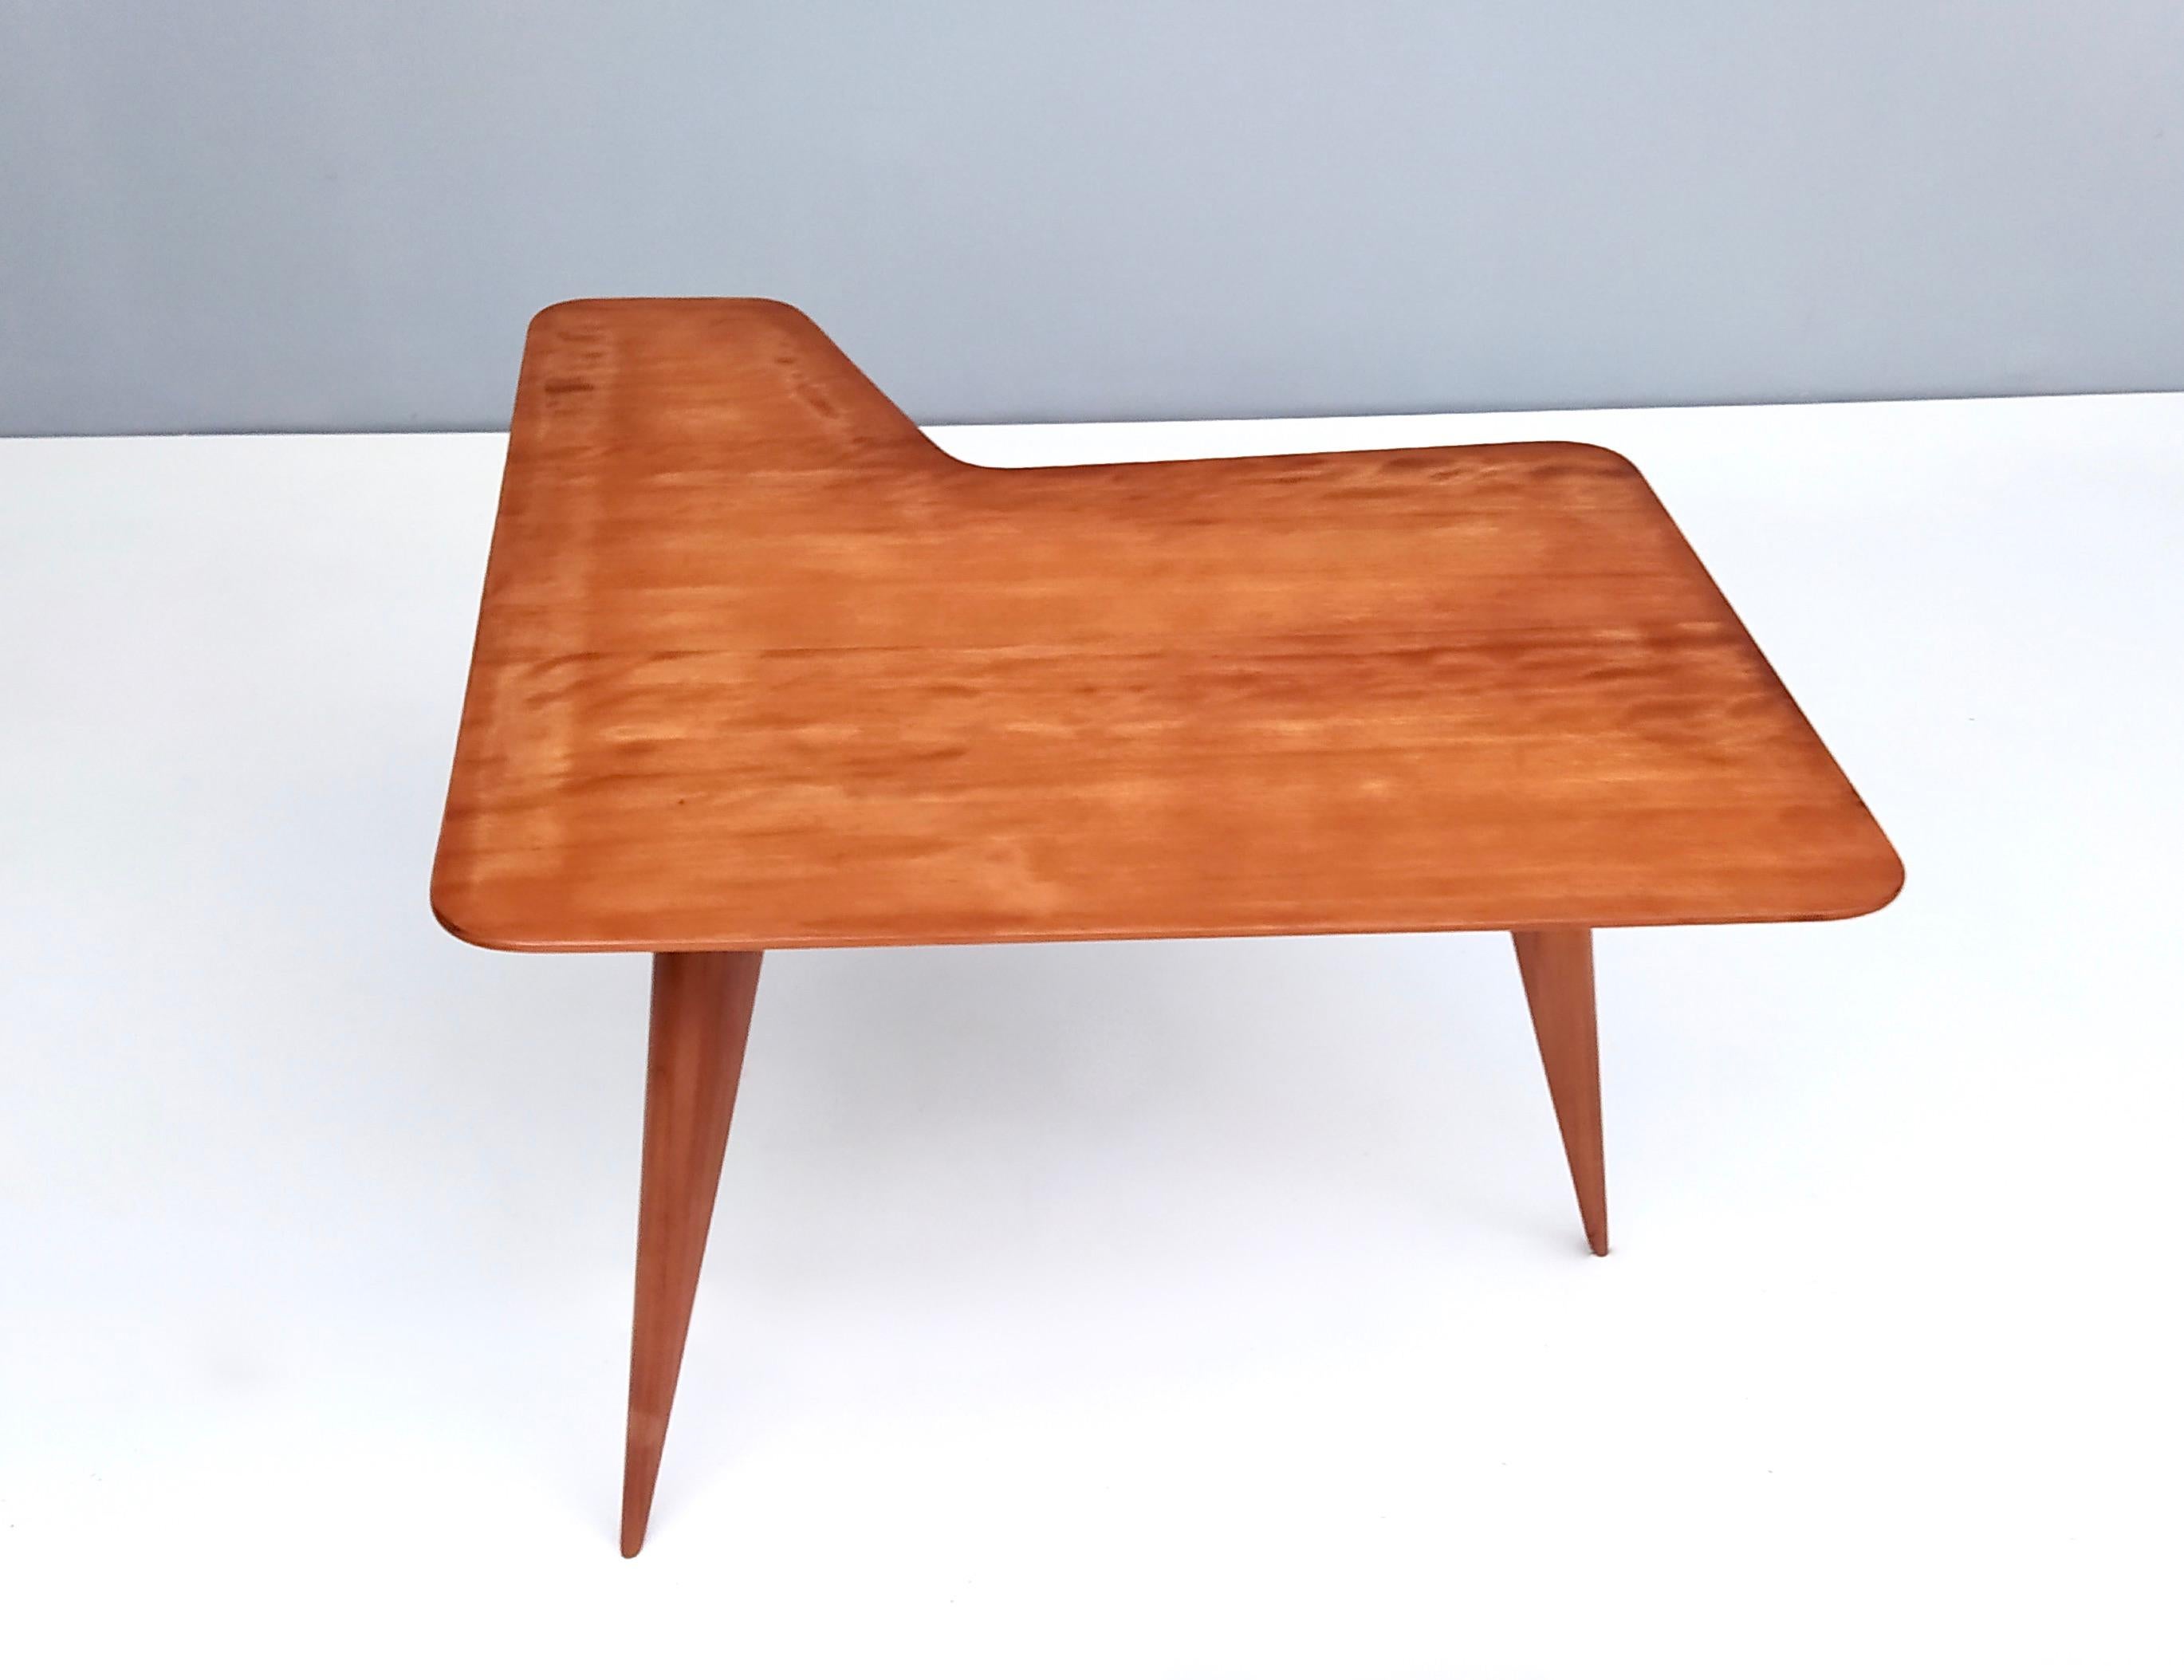 Mid-20th Century Vintage Irregular Shaped Wood Veneer Coffee Table Ascribable to Gio Ponti, Italy For Sale